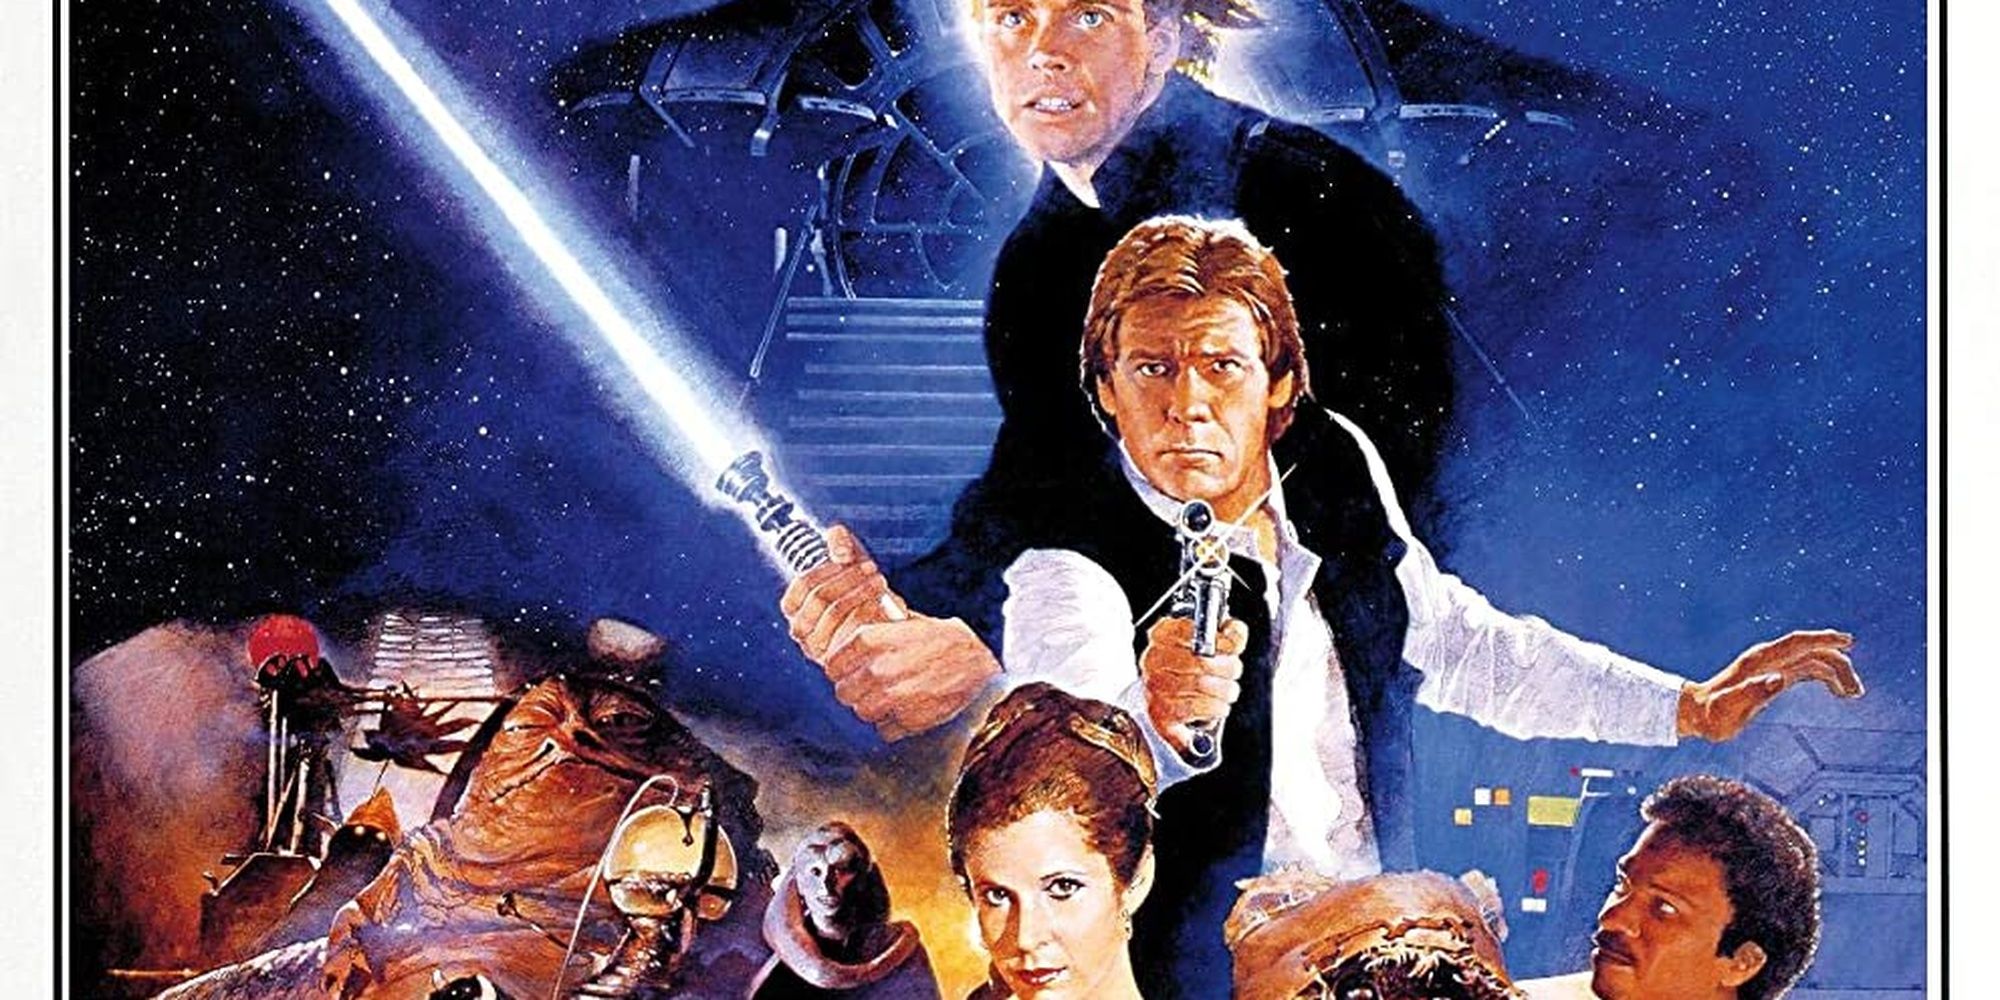 Star Wars Return of the Jedi Poster Cropped